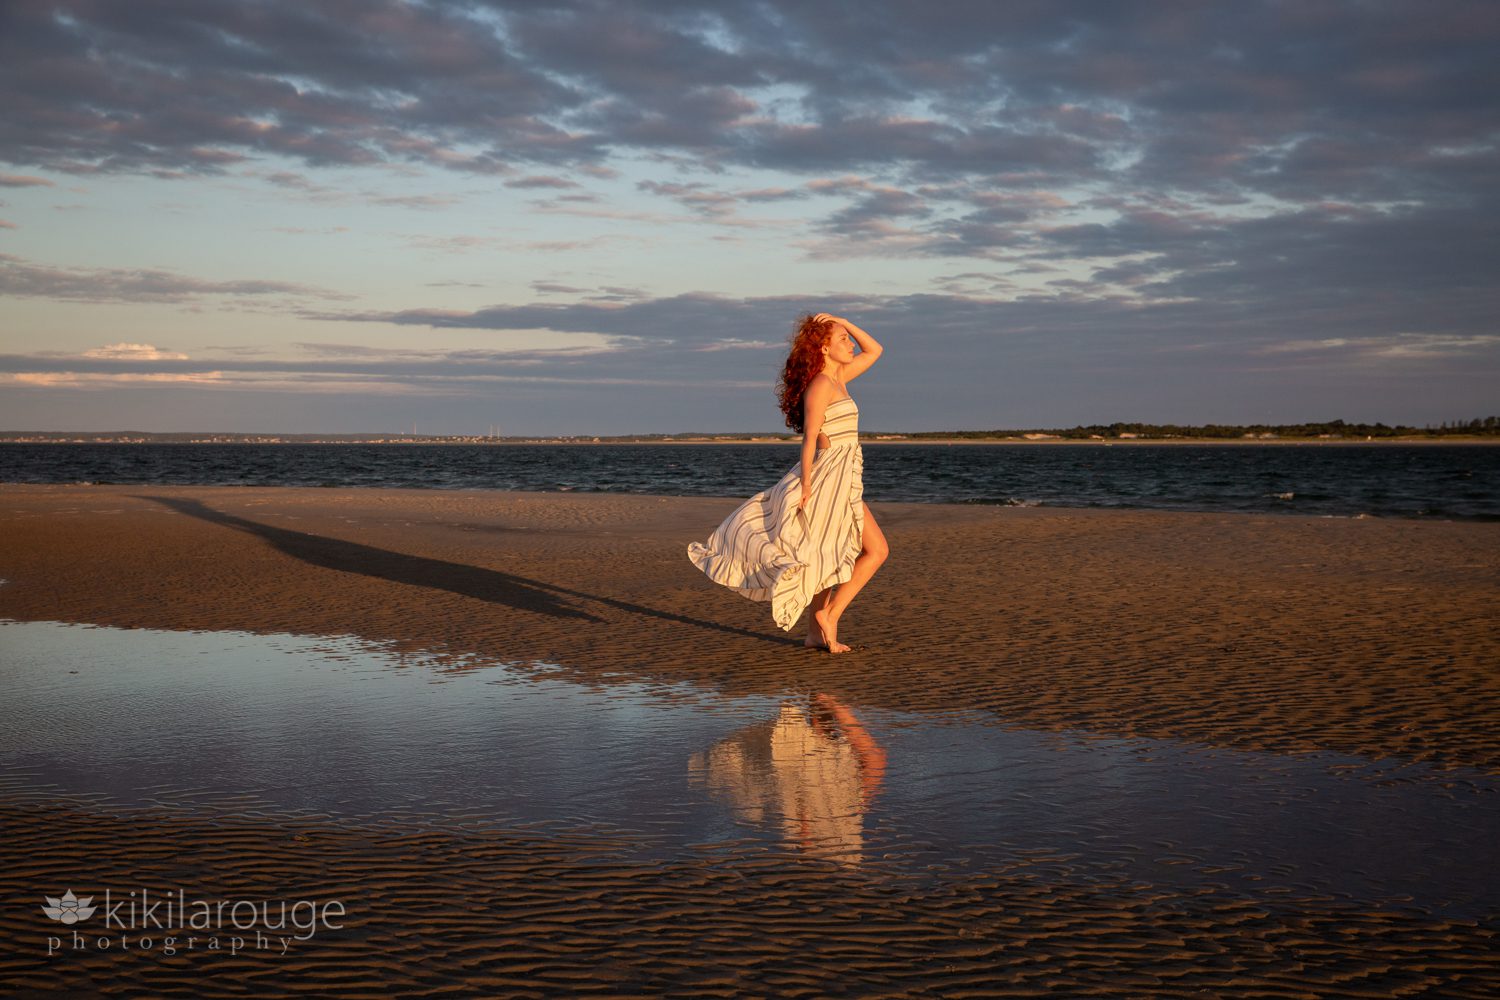 Sunset with dramatic skies at beach with girl in dress and reflection in tide pool at beach